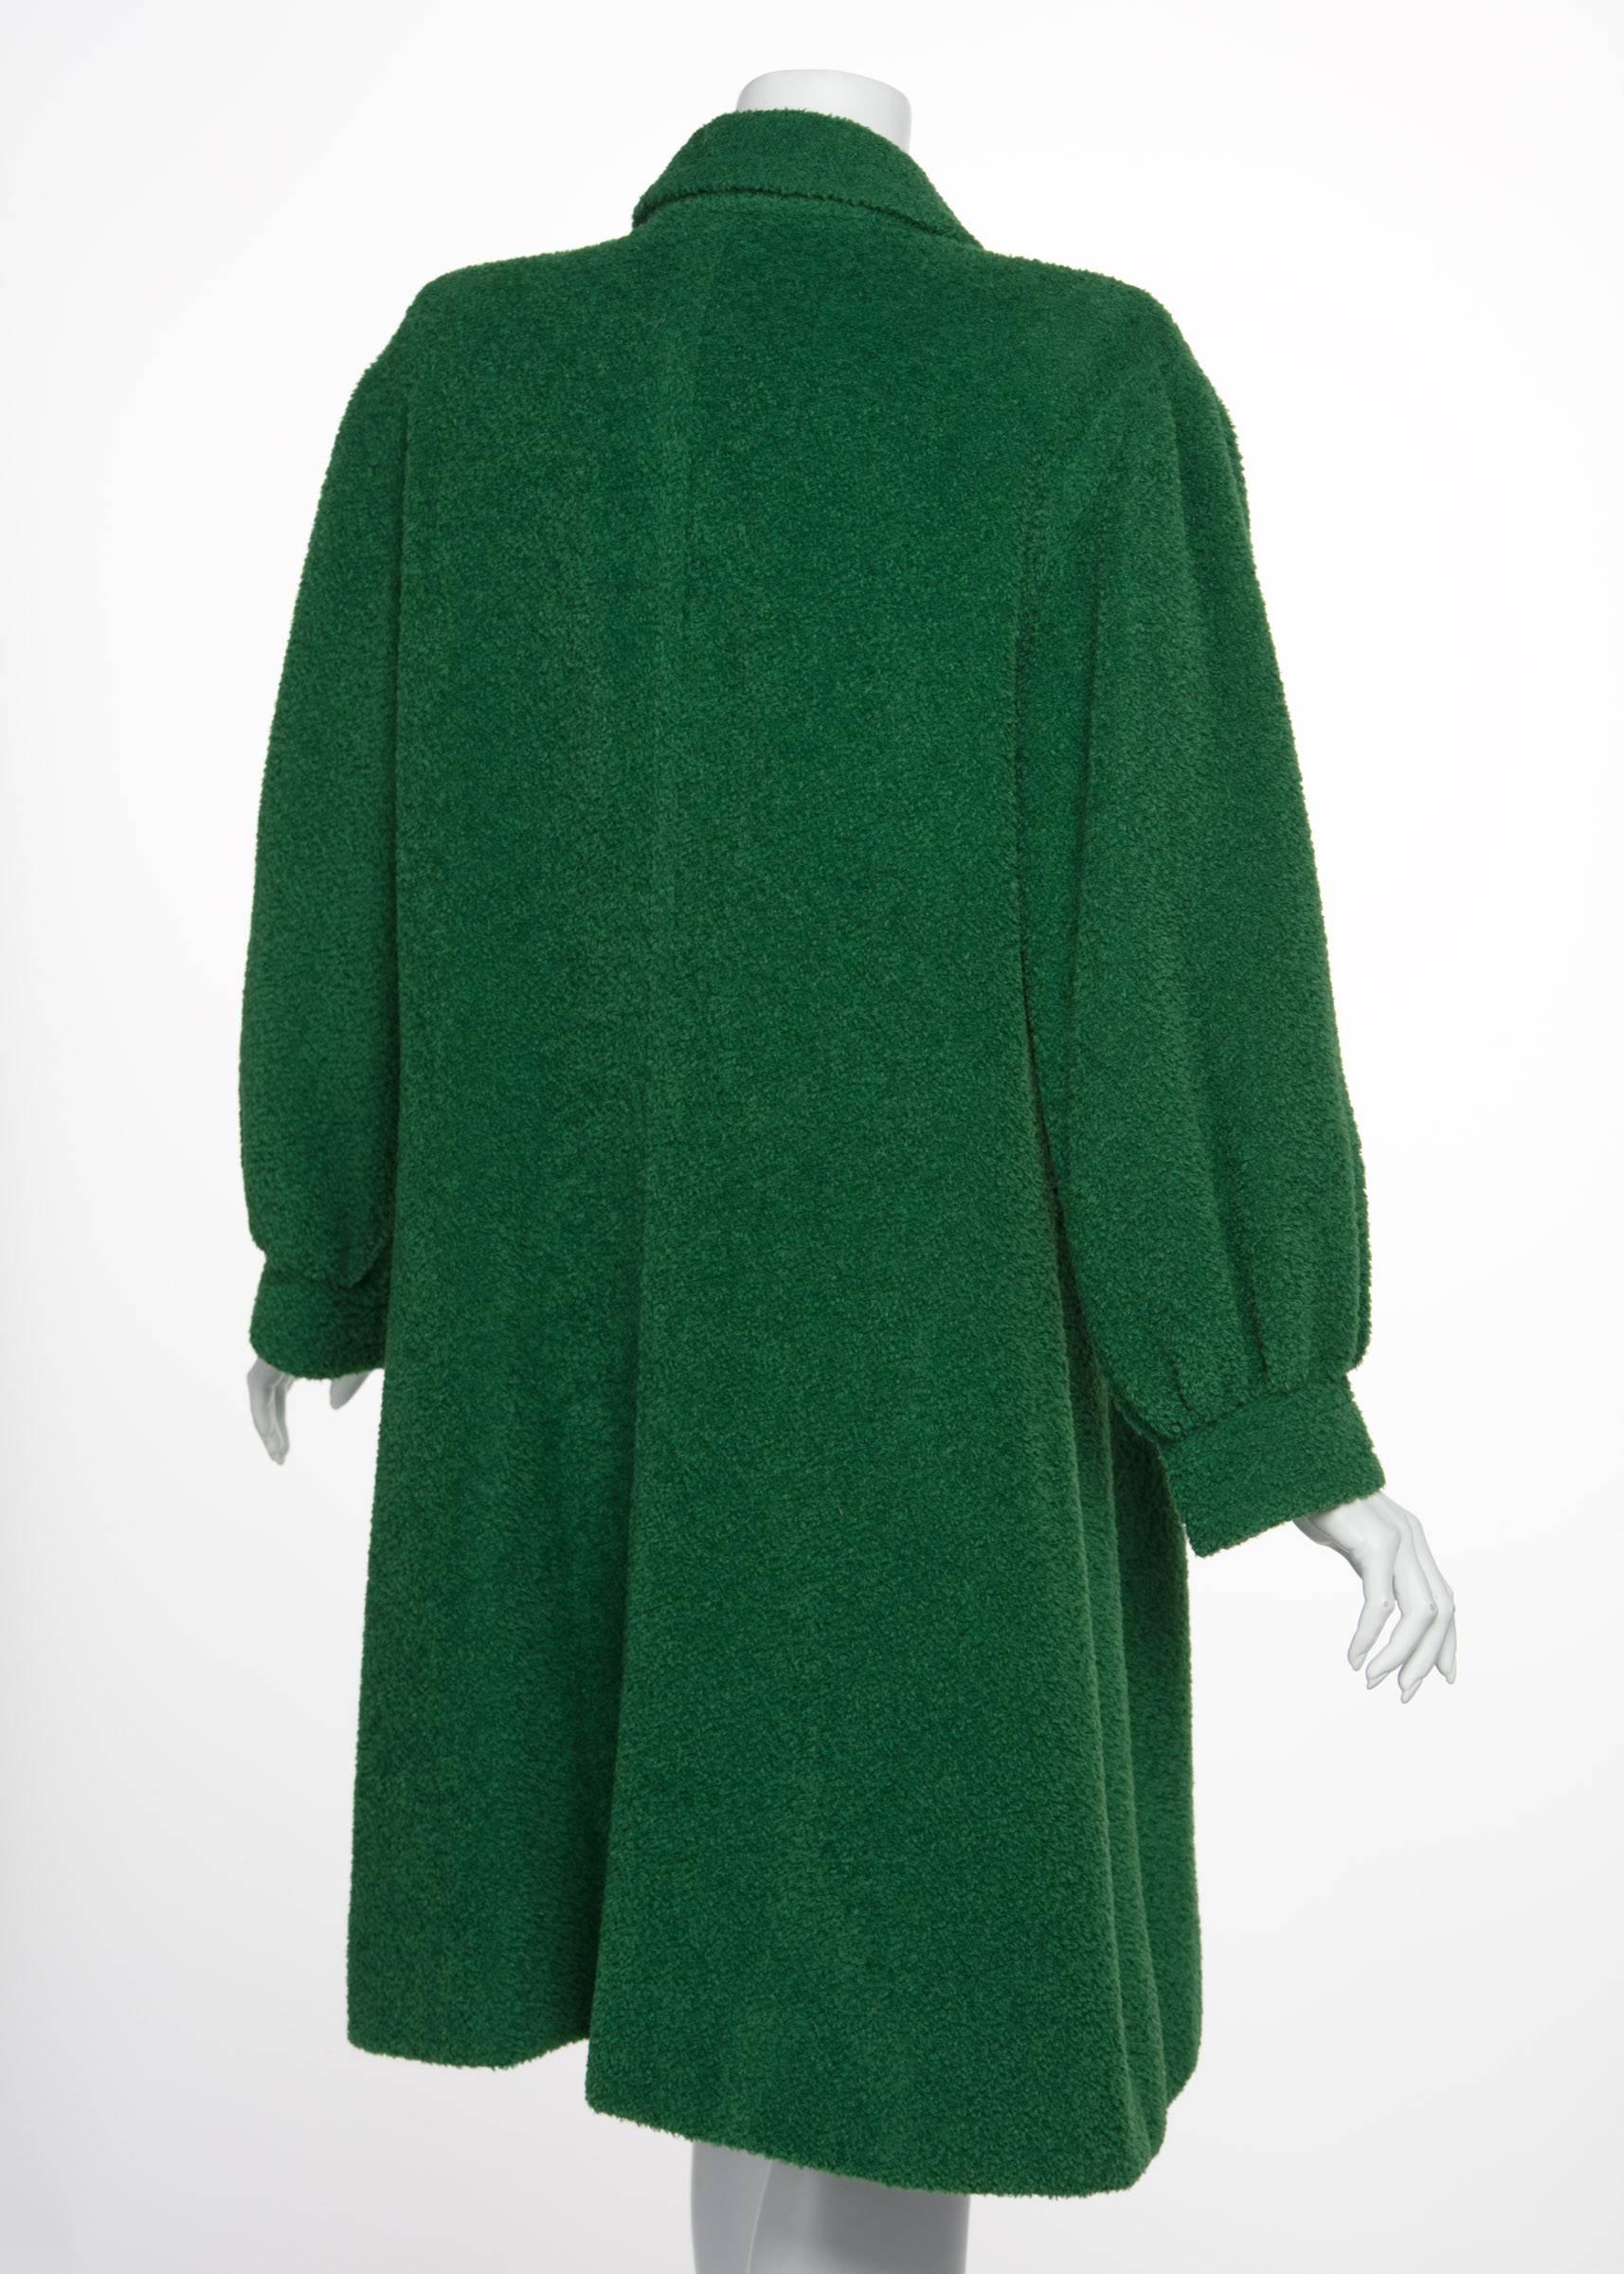 Fall/ Winter Givenchy Haute Couture Green Textured Wool Coat, 1995 1